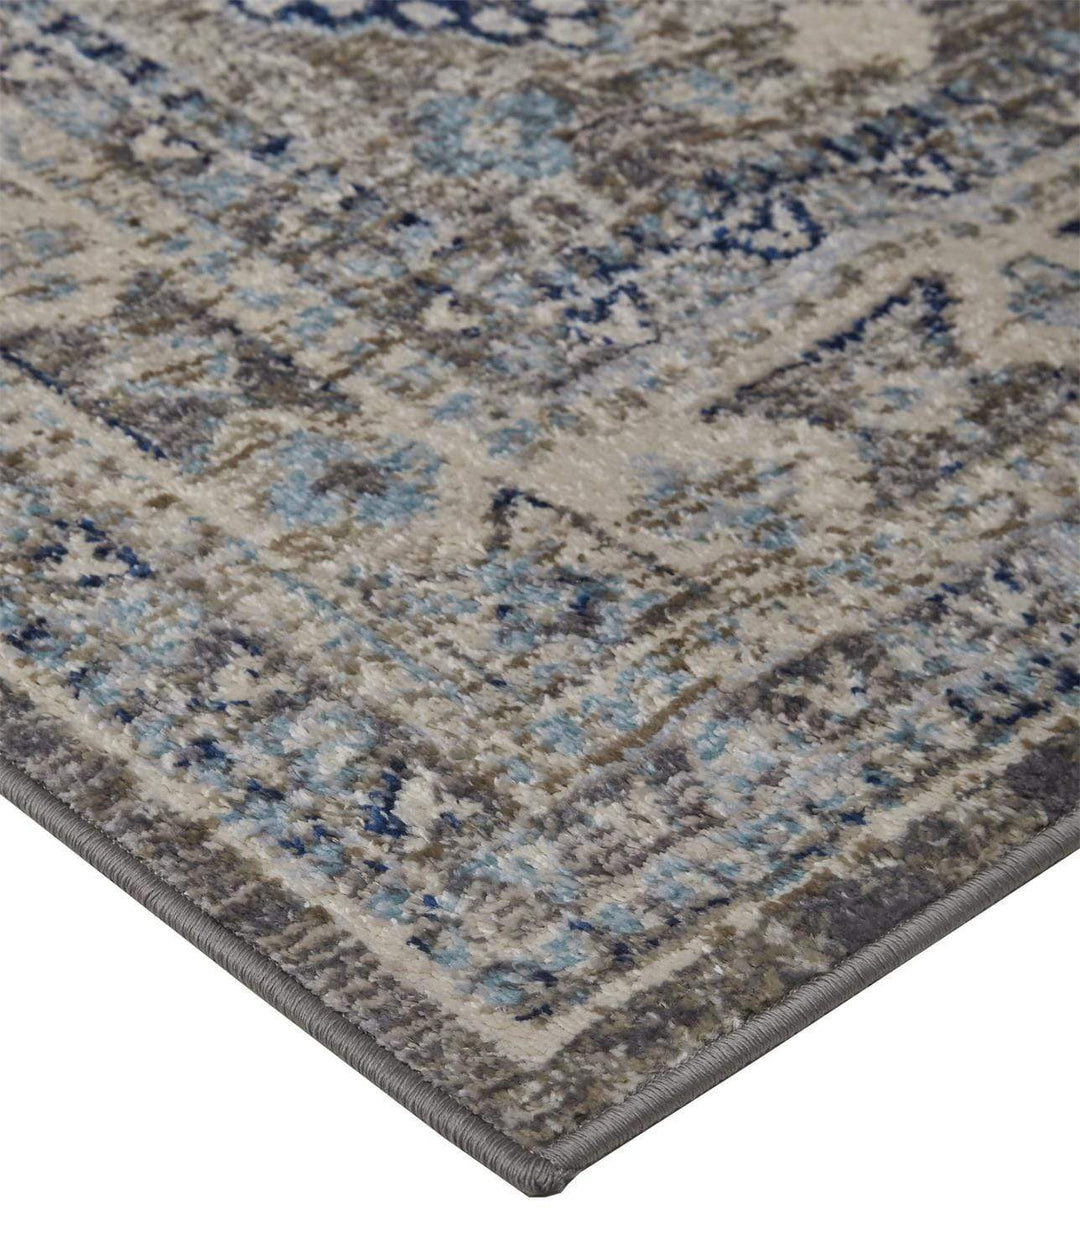 Feizy Feizy Bellini Vintage Bohemian Rug - Delphinium Blue & Gray - Available in 8 Sizes